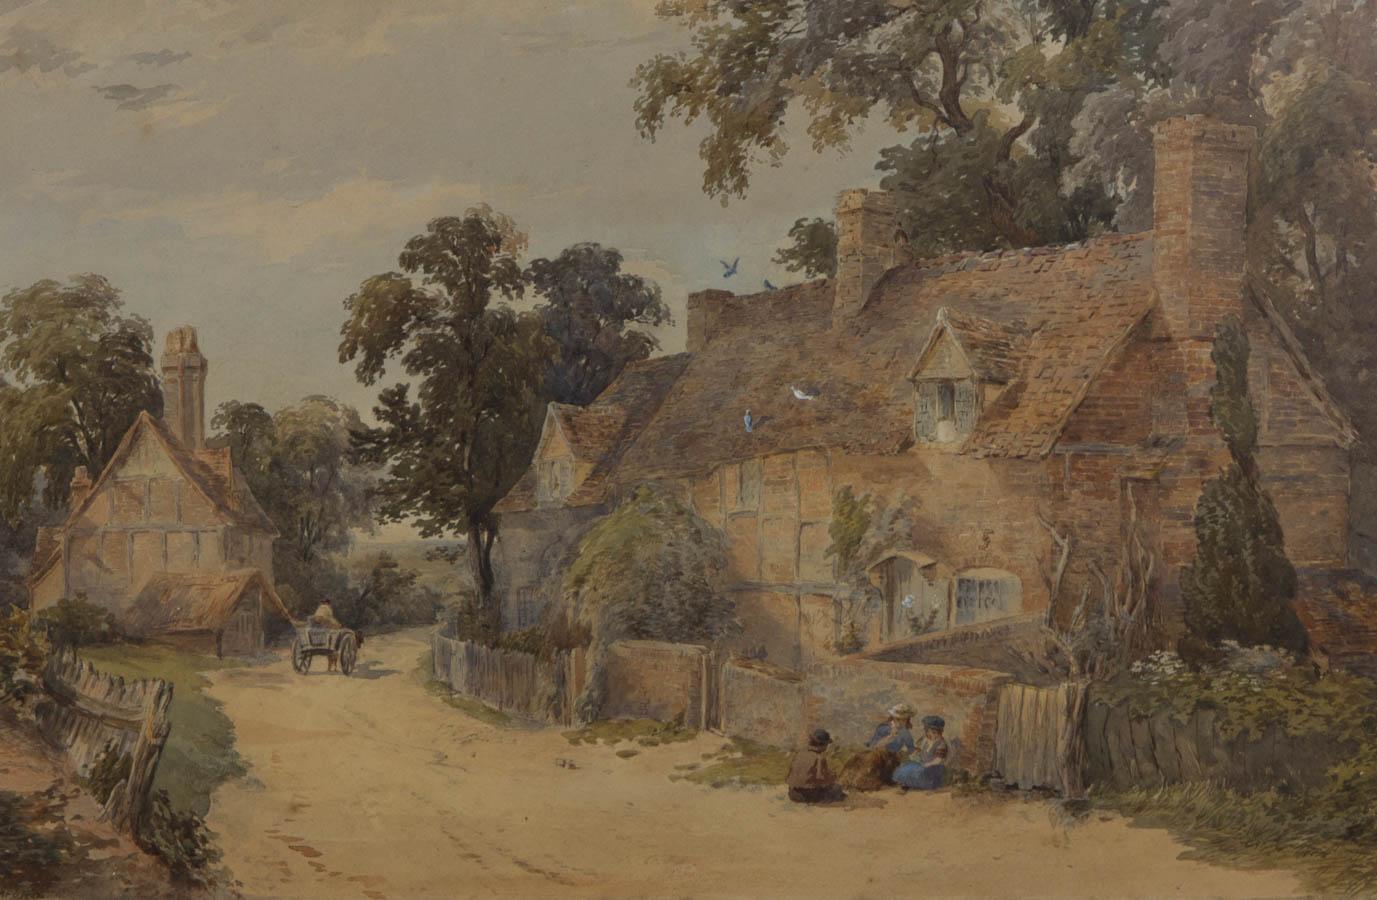 Lawrence George Bomford (1847-1926) - Watercolour, Village Scene with Horse Cart - Brown Landscape Art by Unknown